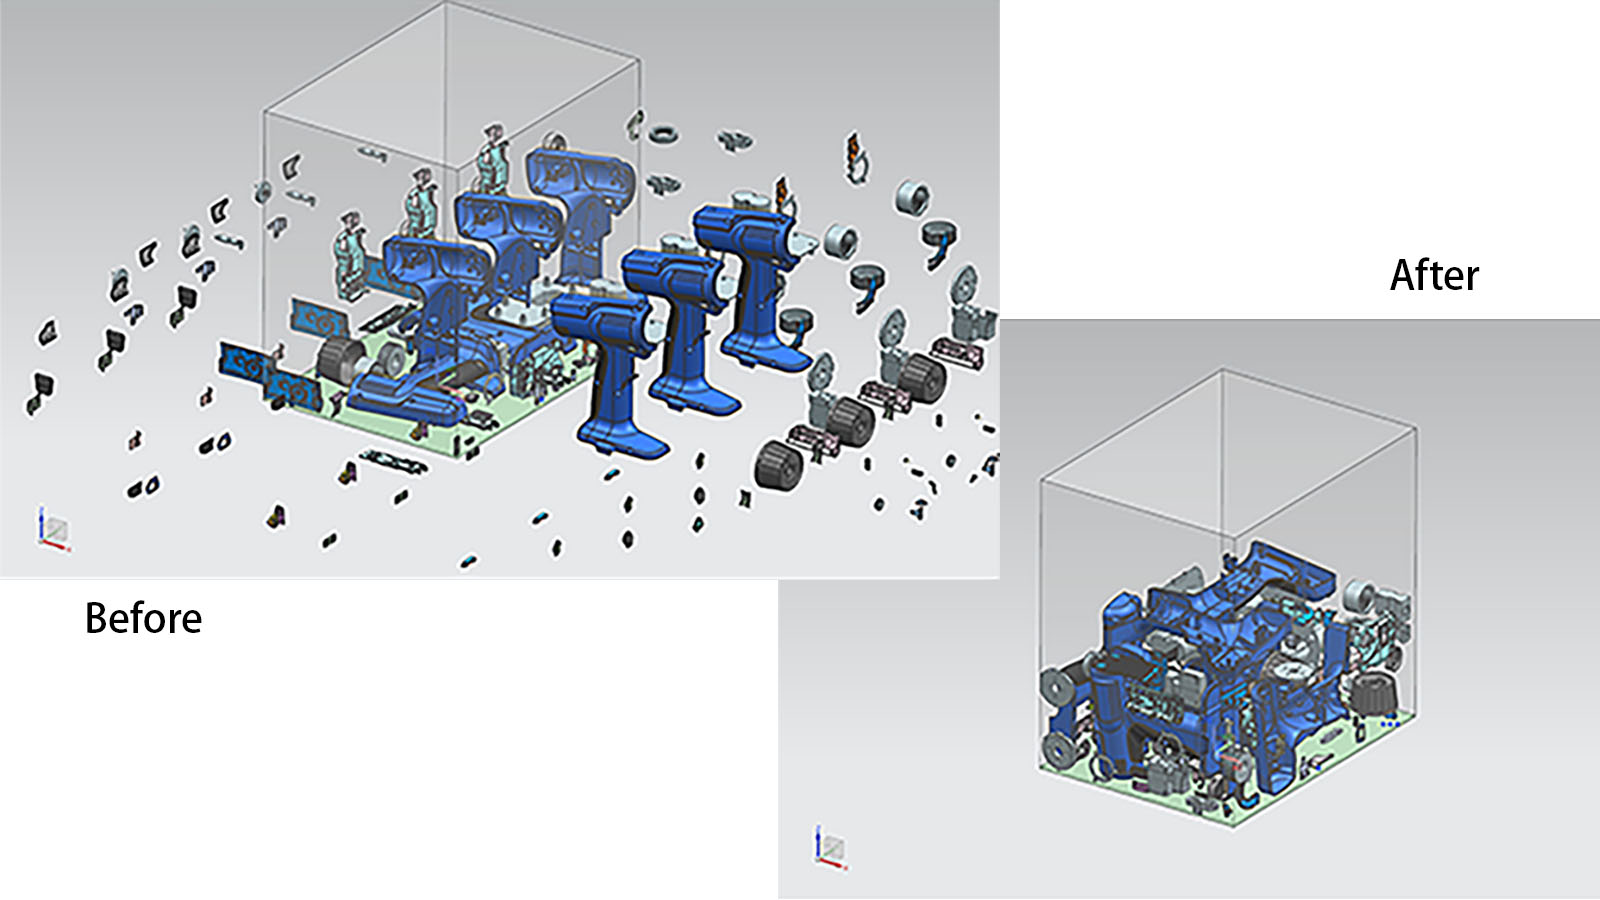 NX AM for HP Multi Jet Fusion: 3D Nesting in Siemens NX